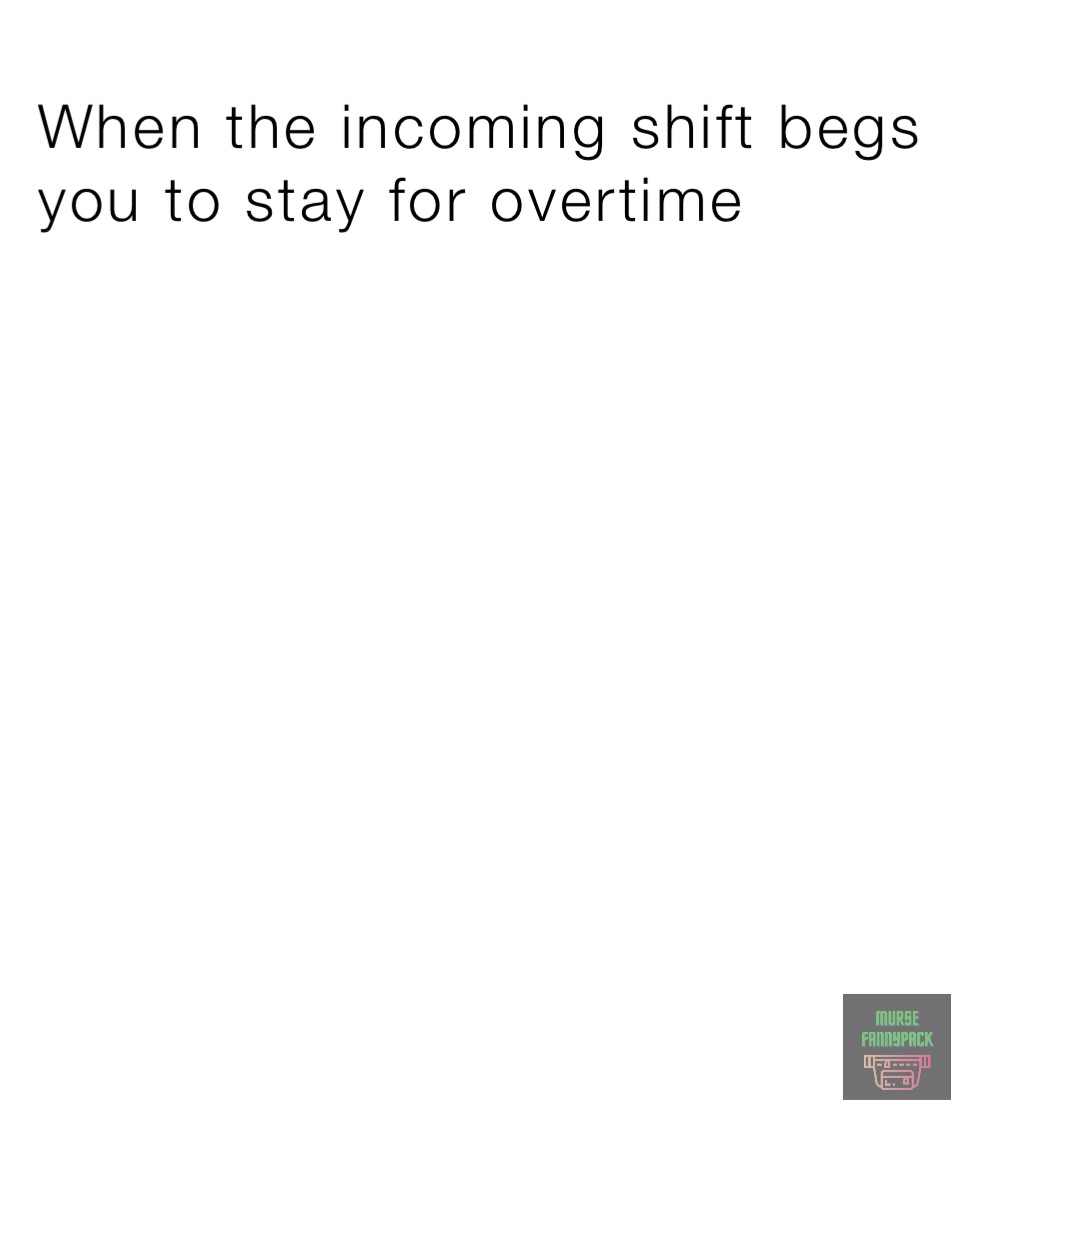 When the incoming shift begs you to stay for overtime